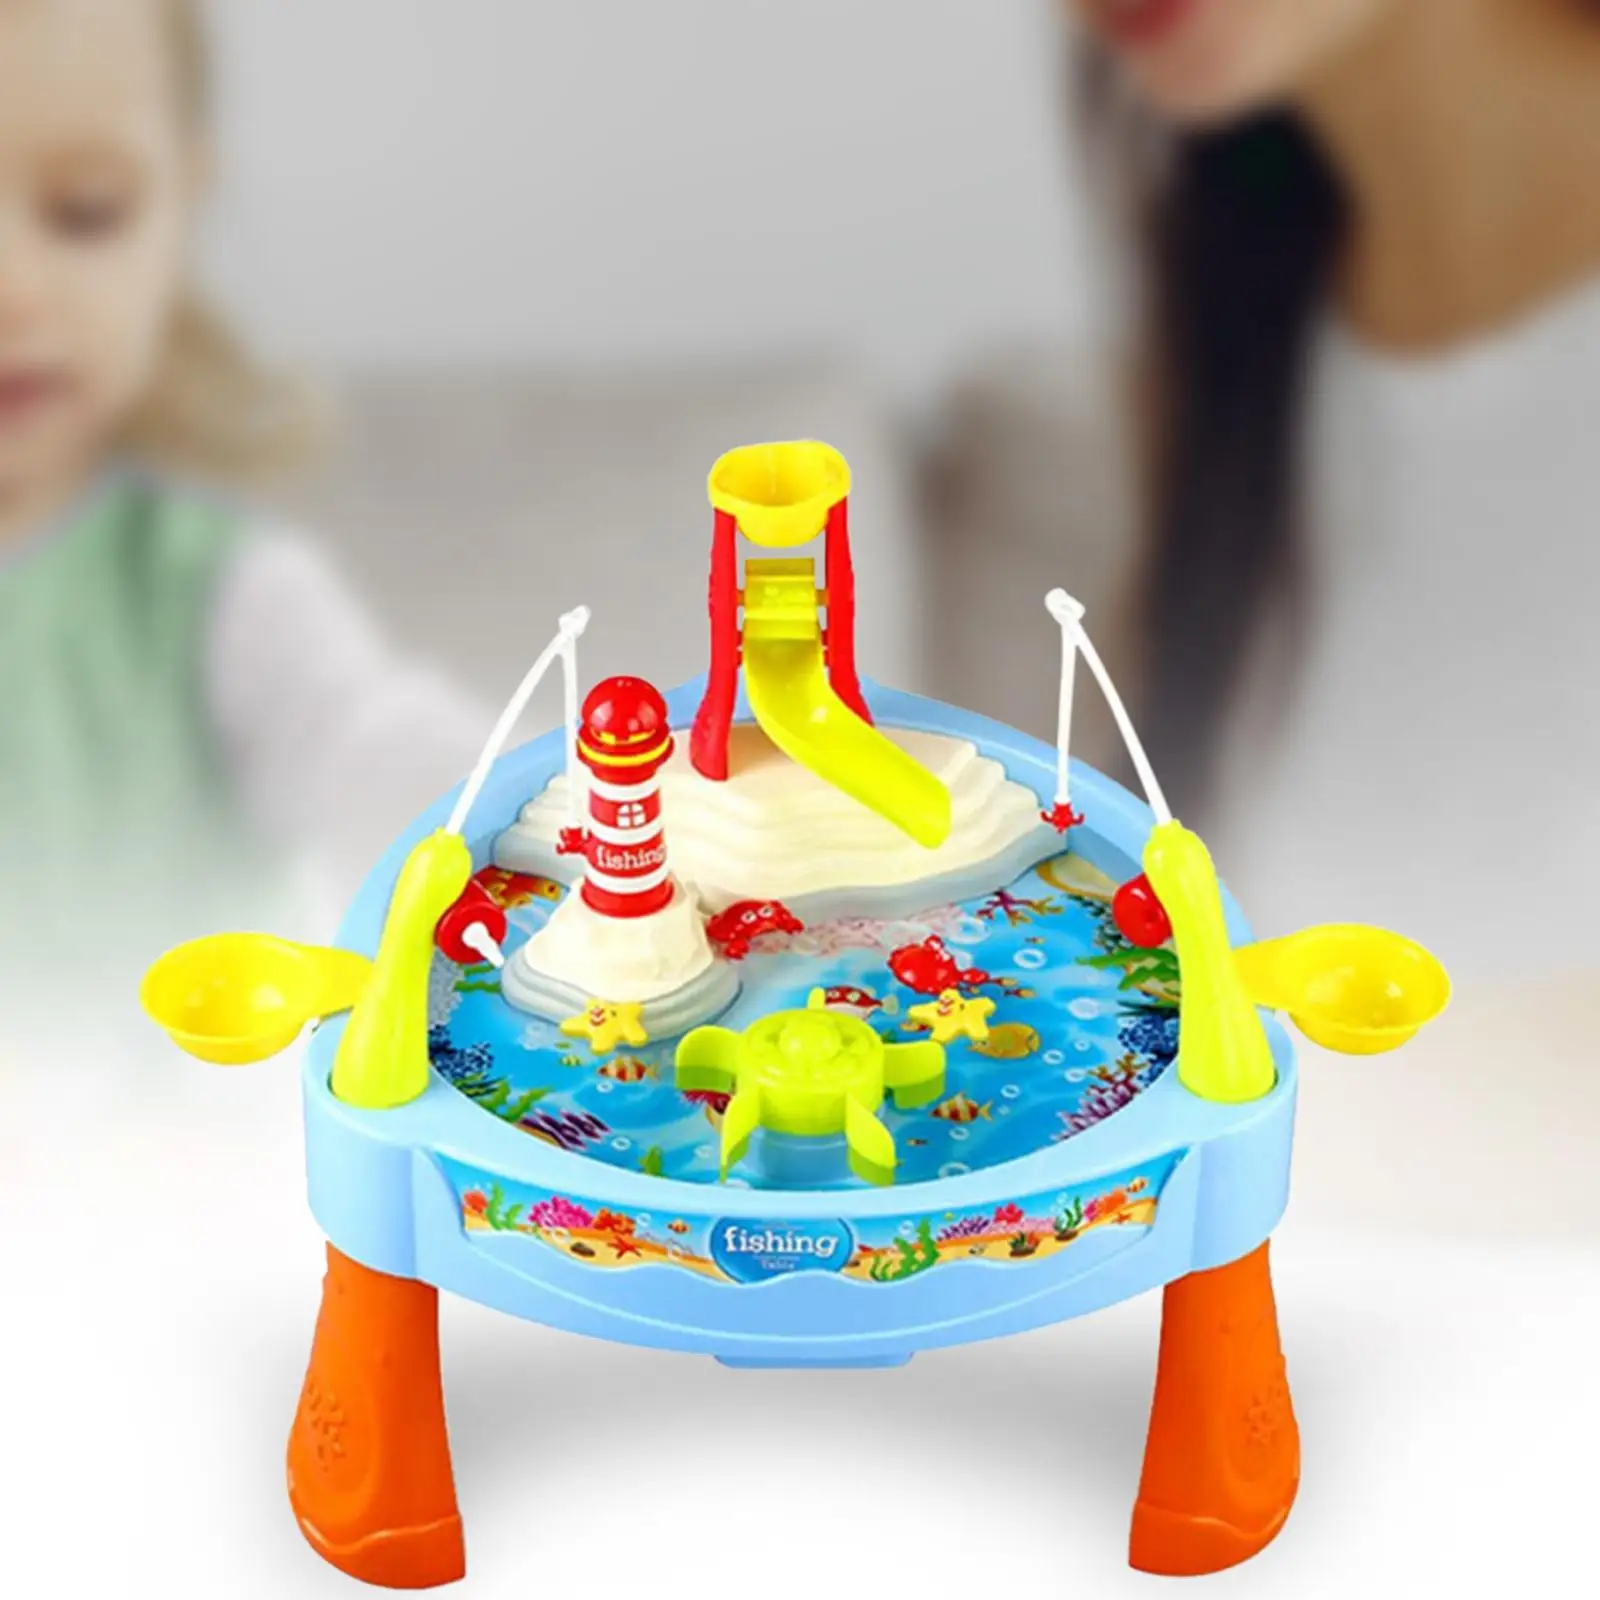 Water Circulating Fishing Game Board Play Set Water Table Toys Small Water Playing Table Outdoor Beach Toys for Activity Beach